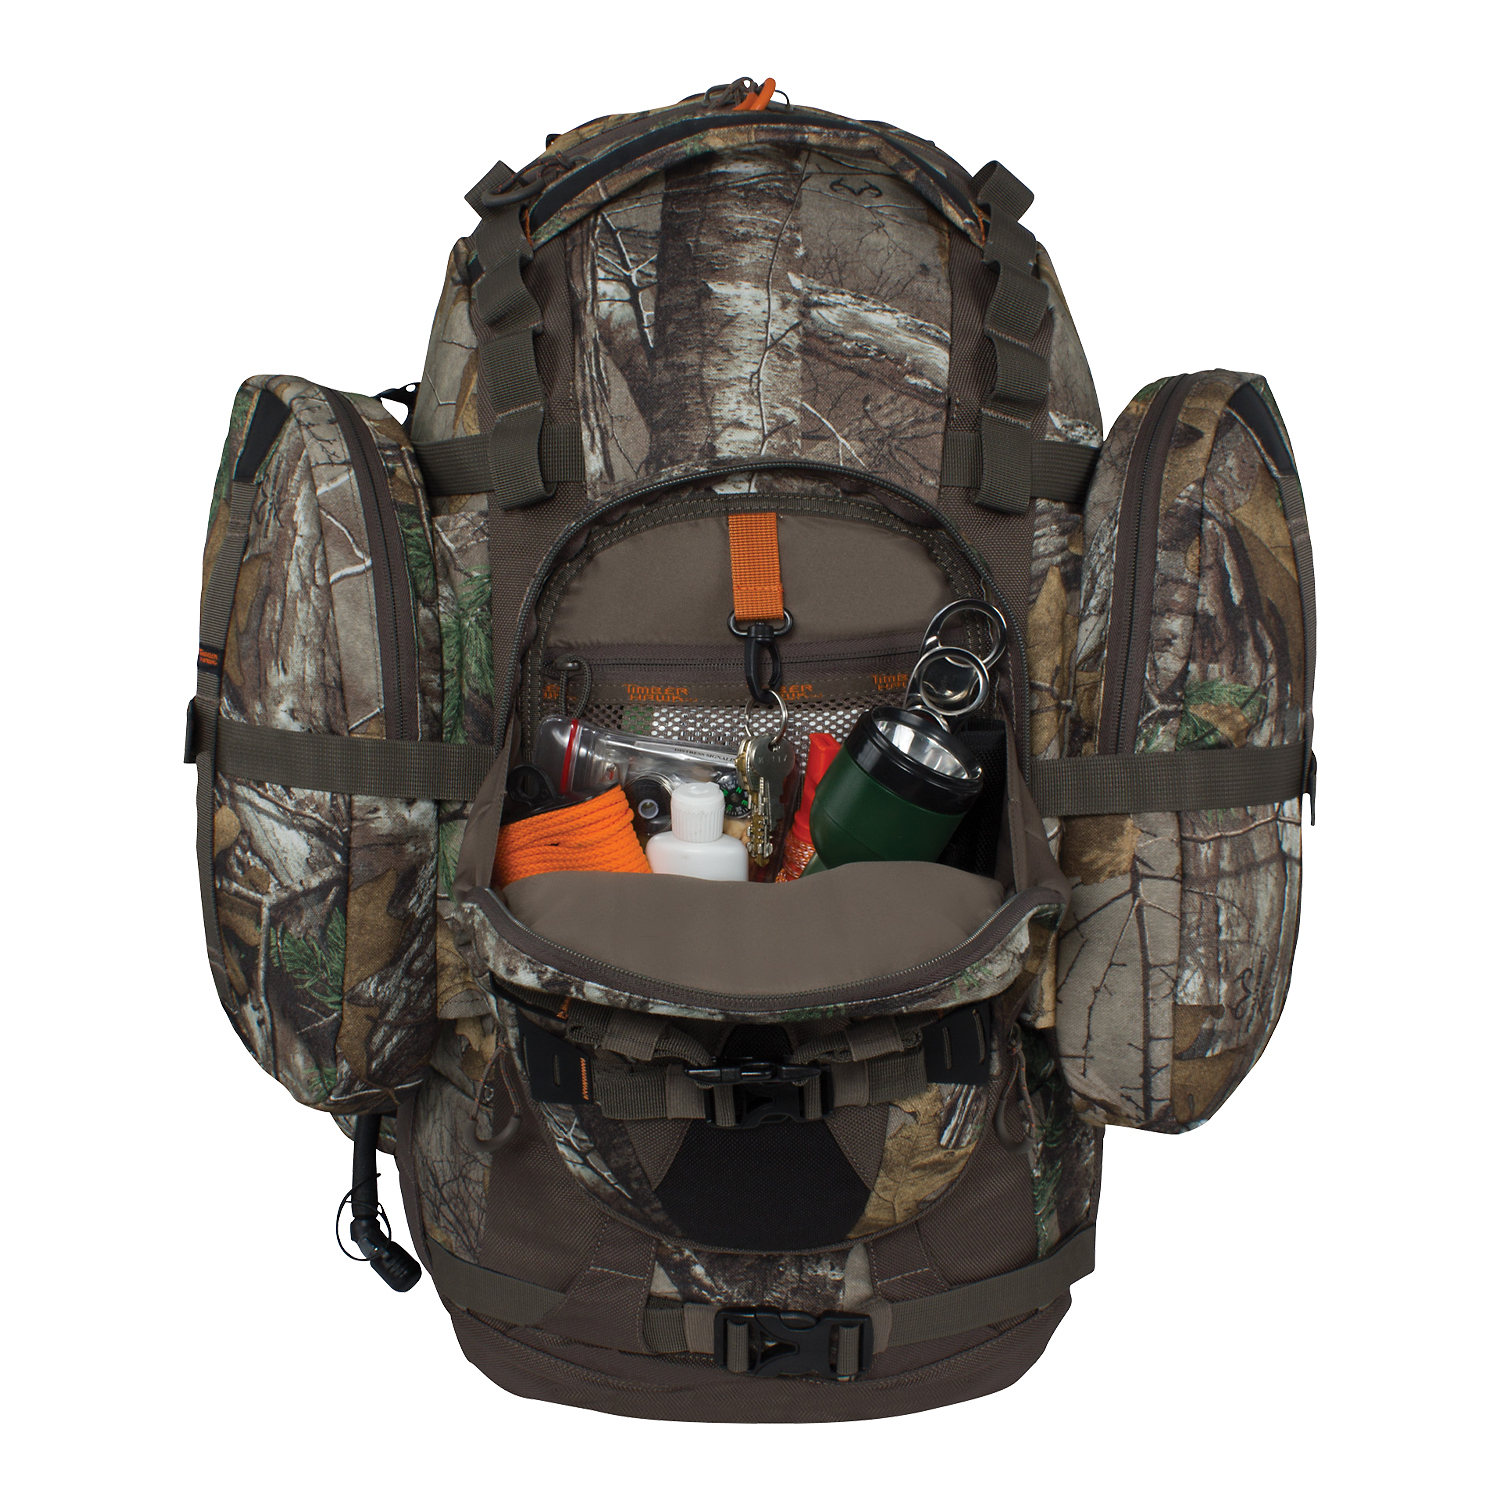 TIMBER HAWK 2 ltr. Backpacking Backpack Storage, Camouflage - image 2 of 5